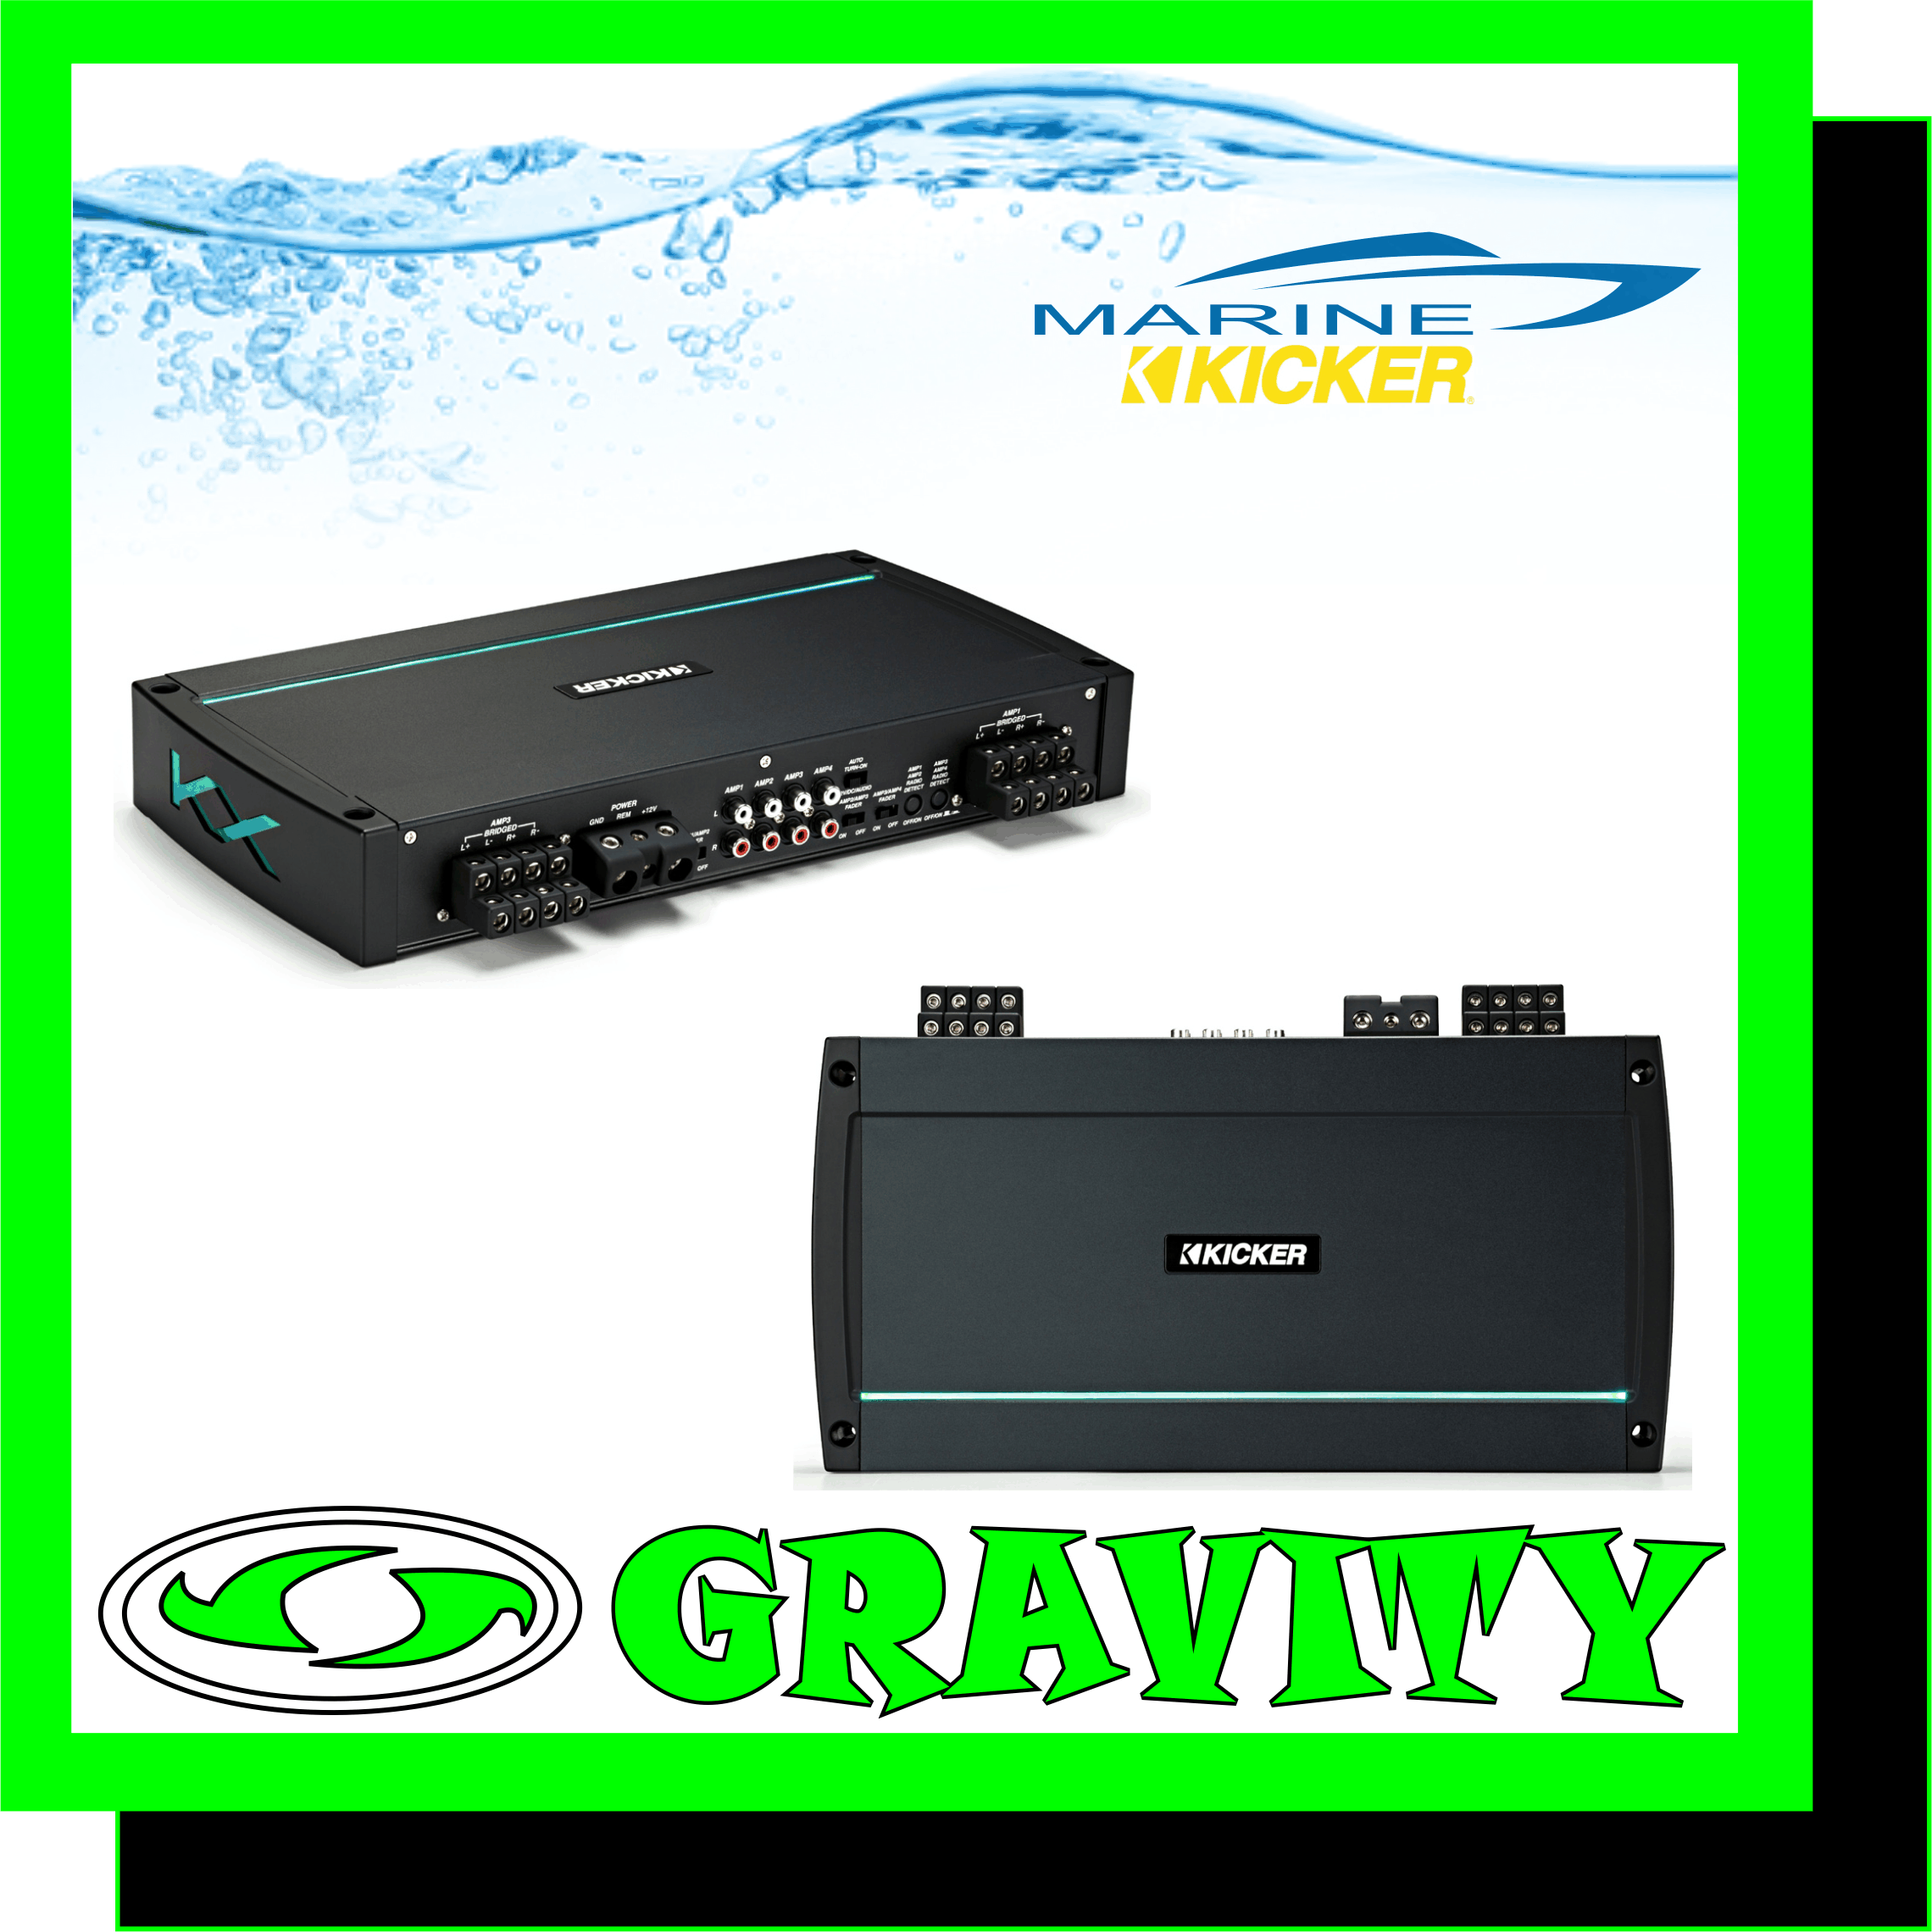 Kicker 44KXMA800.8 8-channel marine amplifier ? 50 watts RMS x 8  Product highlights: 8-channel marine amplifier 50 watts RMS x 8 at 4 ohms (100 watts RMS x 8 at 2 ohms) 200 watts RMS x 4 bridged at 4 ohms (4-ohm stable in bridged mode) CEA-2006 compliant Class D amp technology gain knobs also function as clip lights Amp 1 and Amp 2: variable high- or low-pass filter (10-5000 Hz, 24 dB/octave) Amp 3 and Amp 4: variable high-pass filter (10-500 Hz, 24 dB/octave) variable low-pass filter (40-5000 Hz, 24 dB/octave) bandpass engages both high- and low-pass filters variable bass boost (0-18 dB at 40 Hz) on all channels  MORE FEATURES: weather-resistant conformal-coated circuit boards front-mounted controls protected behind gasket-sealed fold-down door Fail-Safe Integration Technology eliminates noise from your vehicle?s electrical system preamp and speaker-level inputs (speaker wire to RCA adapterrequired for speaker-level input) wiring, hardware, and fuse not included with amplifier 4-gauge power and ground wires and a 120-amp fuse recommended dimensions: 14-311/16?W x 2-1/4?H x 8-7/16?D  Powerful, dependable, and good-looking Kicker's KXMA800.8 marine 8-channel amplifier will bring brilliance and clarity to your sound, powering eight speakers with 50 watts RMS each. You can also use this amp in a 4-way system, with two channels powering tweeters, two channels powering midrange drivers, two powering mid-bass speakers, and two channels bridged together to power a subwoofer with up to 200 watts RMS. This versatile amp will always find a place in your boat's sound system, no matter how it evolves over the years.  Stays cool under pressure This reliable and compact KXM Series rocker will run cool even when pushed hard, thanks to its high-mass heatsink, high-tech internal components, and efficient full-range Class-D amp technology. Made for marine use The KXMA800.8 features a conformal-coated circuit board for improved water and dust resistance, plus corrosion-resistant power connections, a gasket-sealed front cover, and stainless steel mounting hardware that won't rust all over your boat's gel coat or carpeting.  Connection perfection Kicker employs their Fail-Safe Integration Technology (FIT2?) to reject noise and stop any interference generated by your boat's electronics, so you'll enjoy your music clean and pure. Speaker-level inputs make it possible to hook this amp up to almost any stereo receiver or radio. Kicker also helps you set this amp's gain properly, by offering free test tones for downloading. You play a tone and turn the gain up until the gain knob glows red. Then, you turn it down until it just goes out, and the amp's gain is set perfectly.  Versatile controls behind the folding door A gasket-sealed front door gives you quick and easy access to your amp's controls. You can tune for almost any kind of speaker, as the steeply-sloped high- and low-pass filters offer a wide range of adjustment. The filter sections for the Amp 3 and Amp 4 channels can be set up for bandpass operation ? where both the high- and low-pass filters are engaged to allow only the frequencies between them to play ? for optimizing the signal for midrange speakers in a 3- or 4-way system.